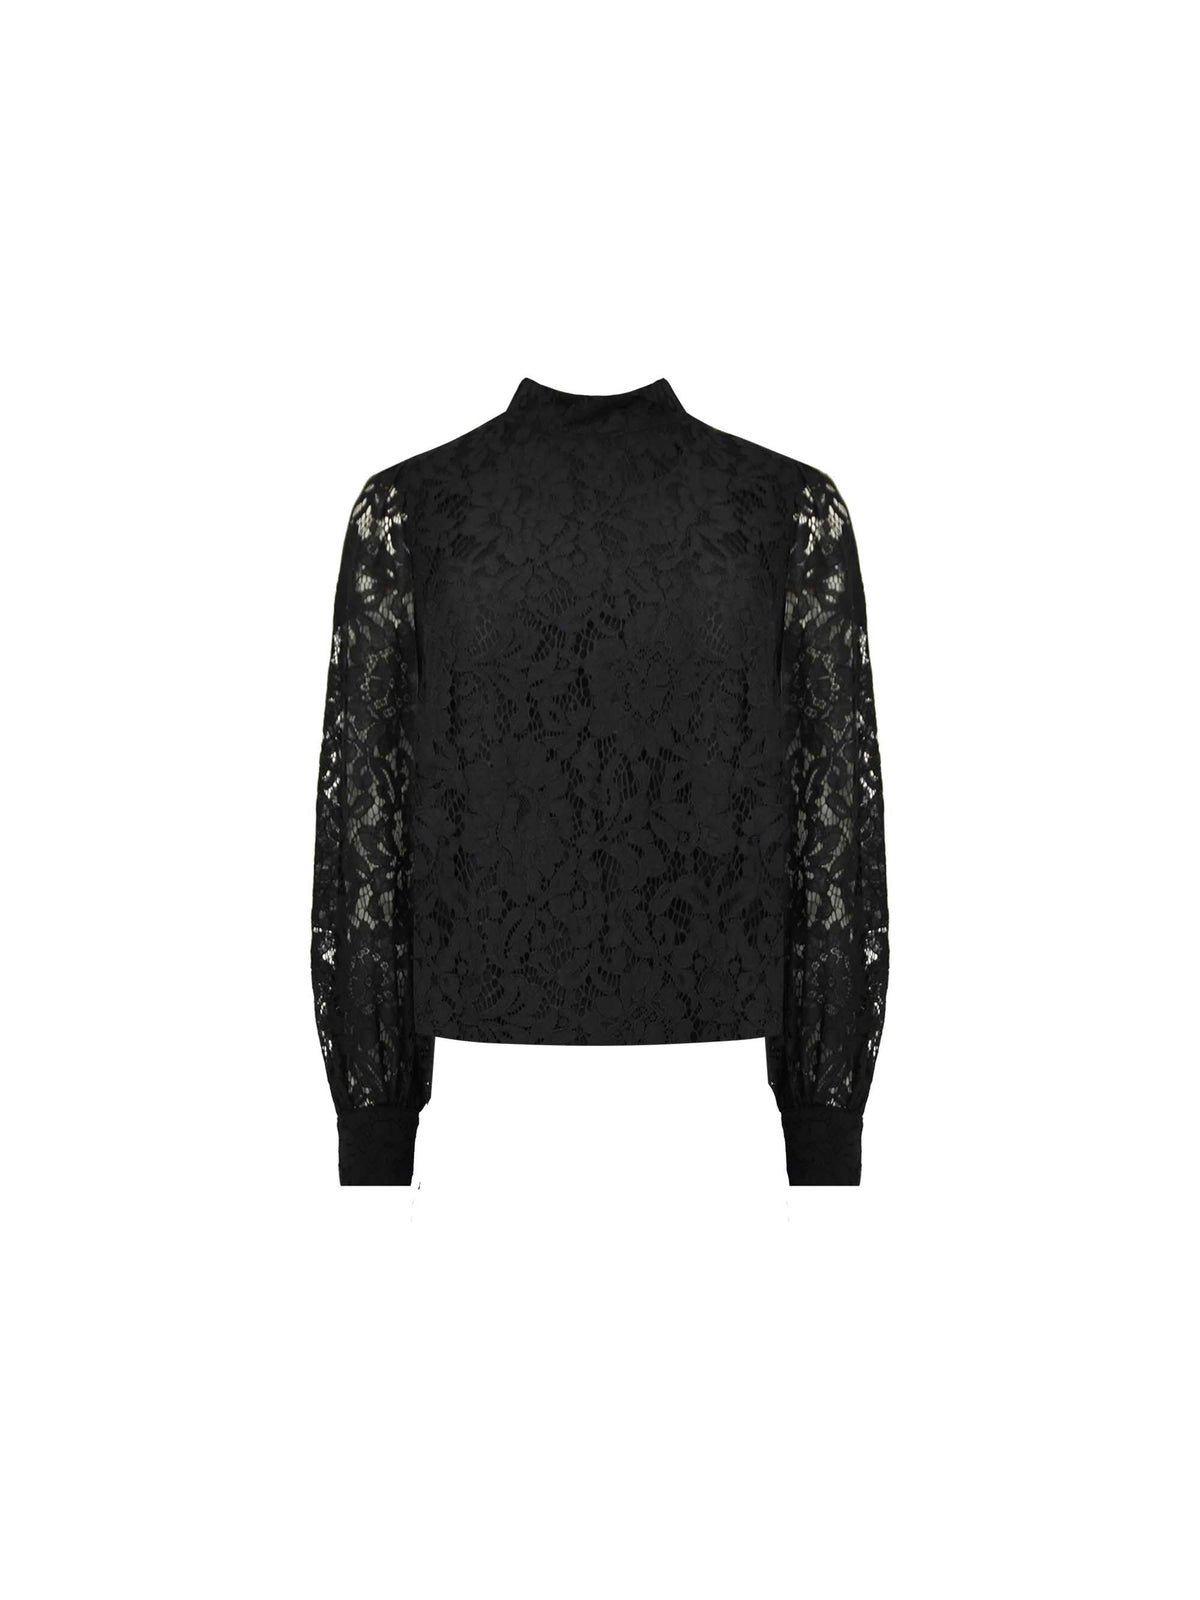 Black Lace High Neck Top